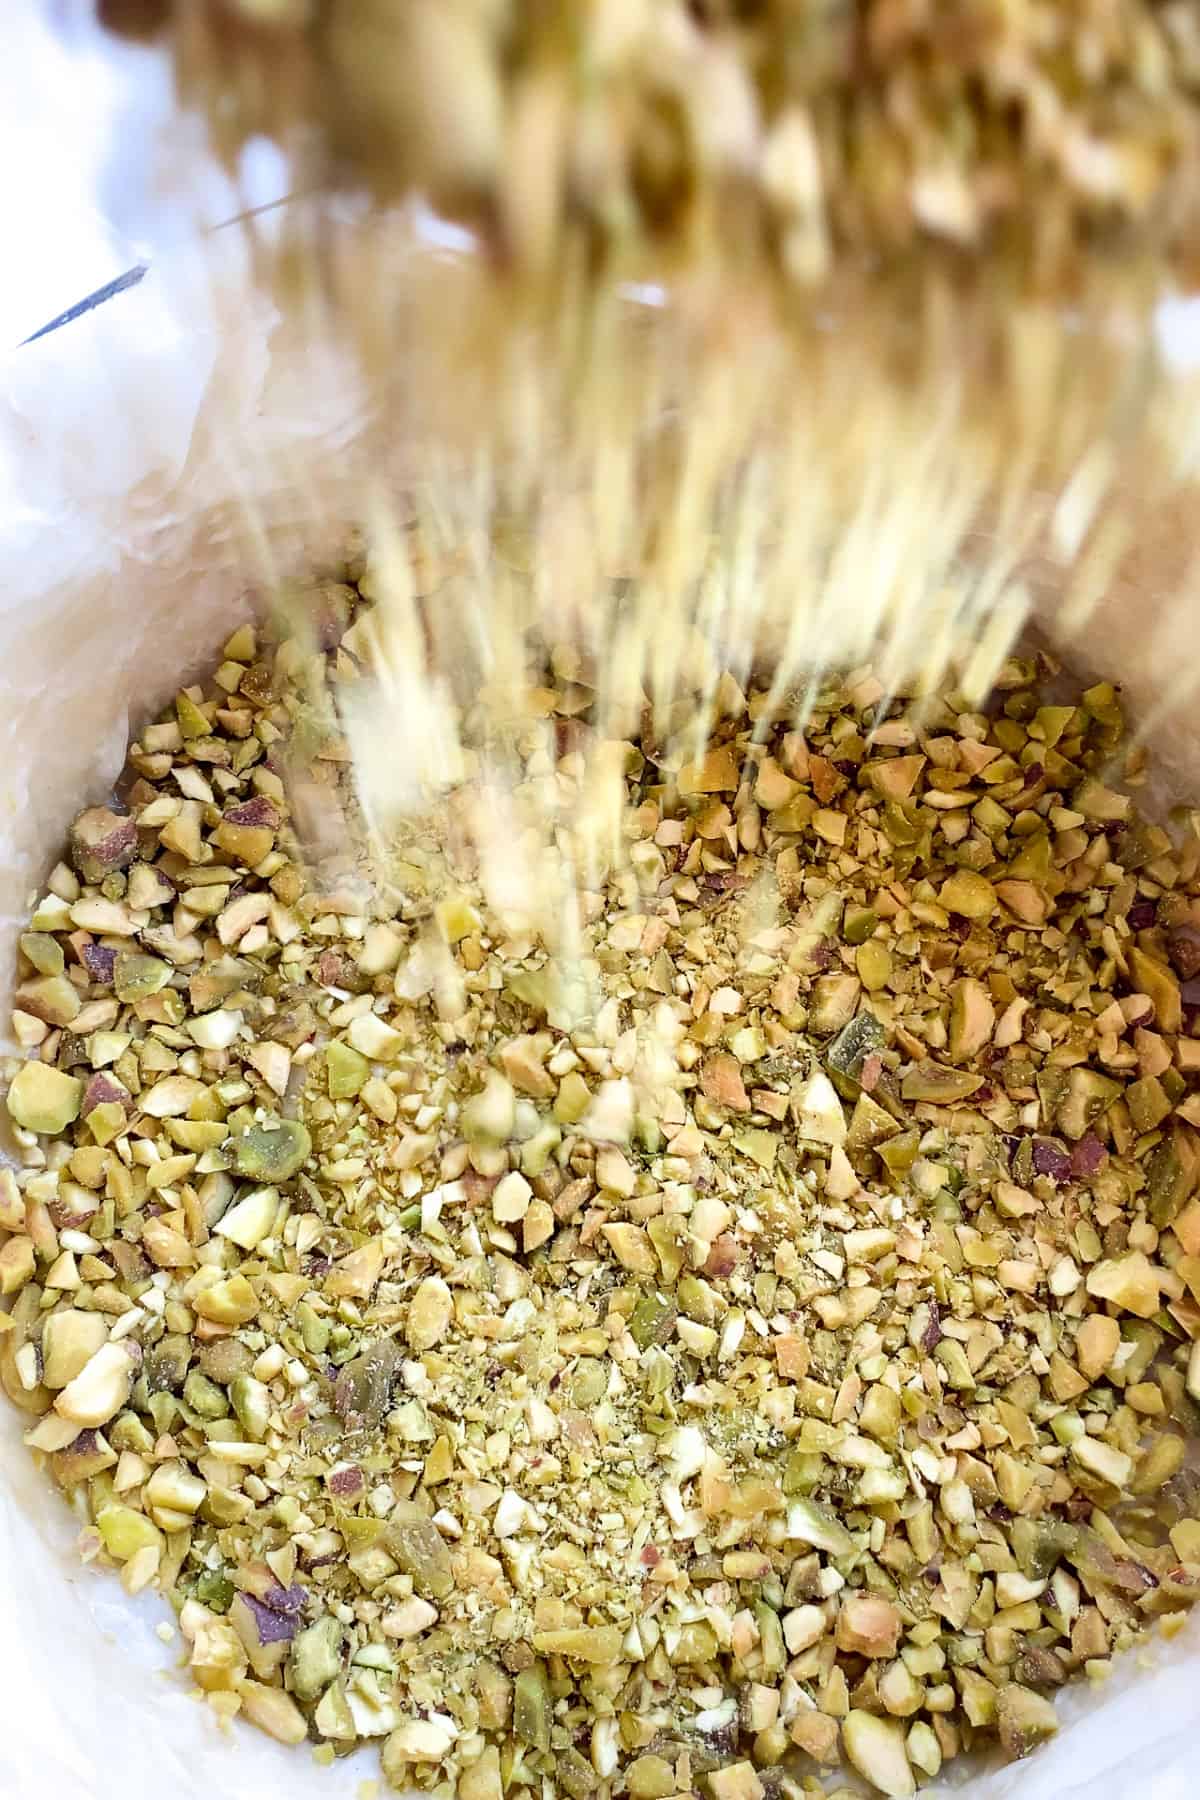 pistachio meat being poured into cheesecake pan